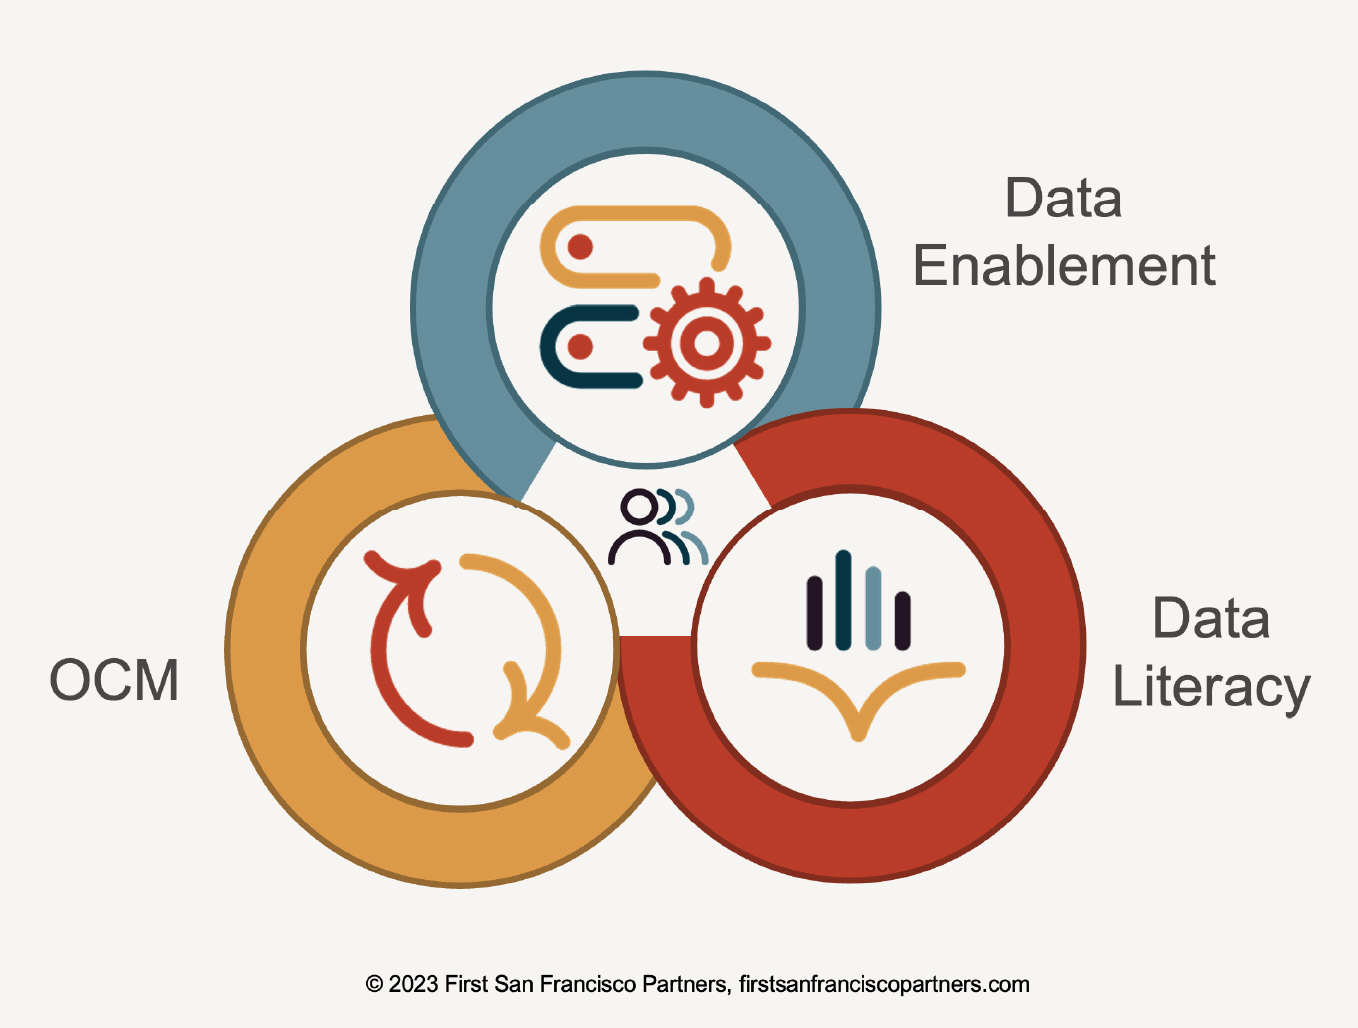 Data enablement image from FSFP